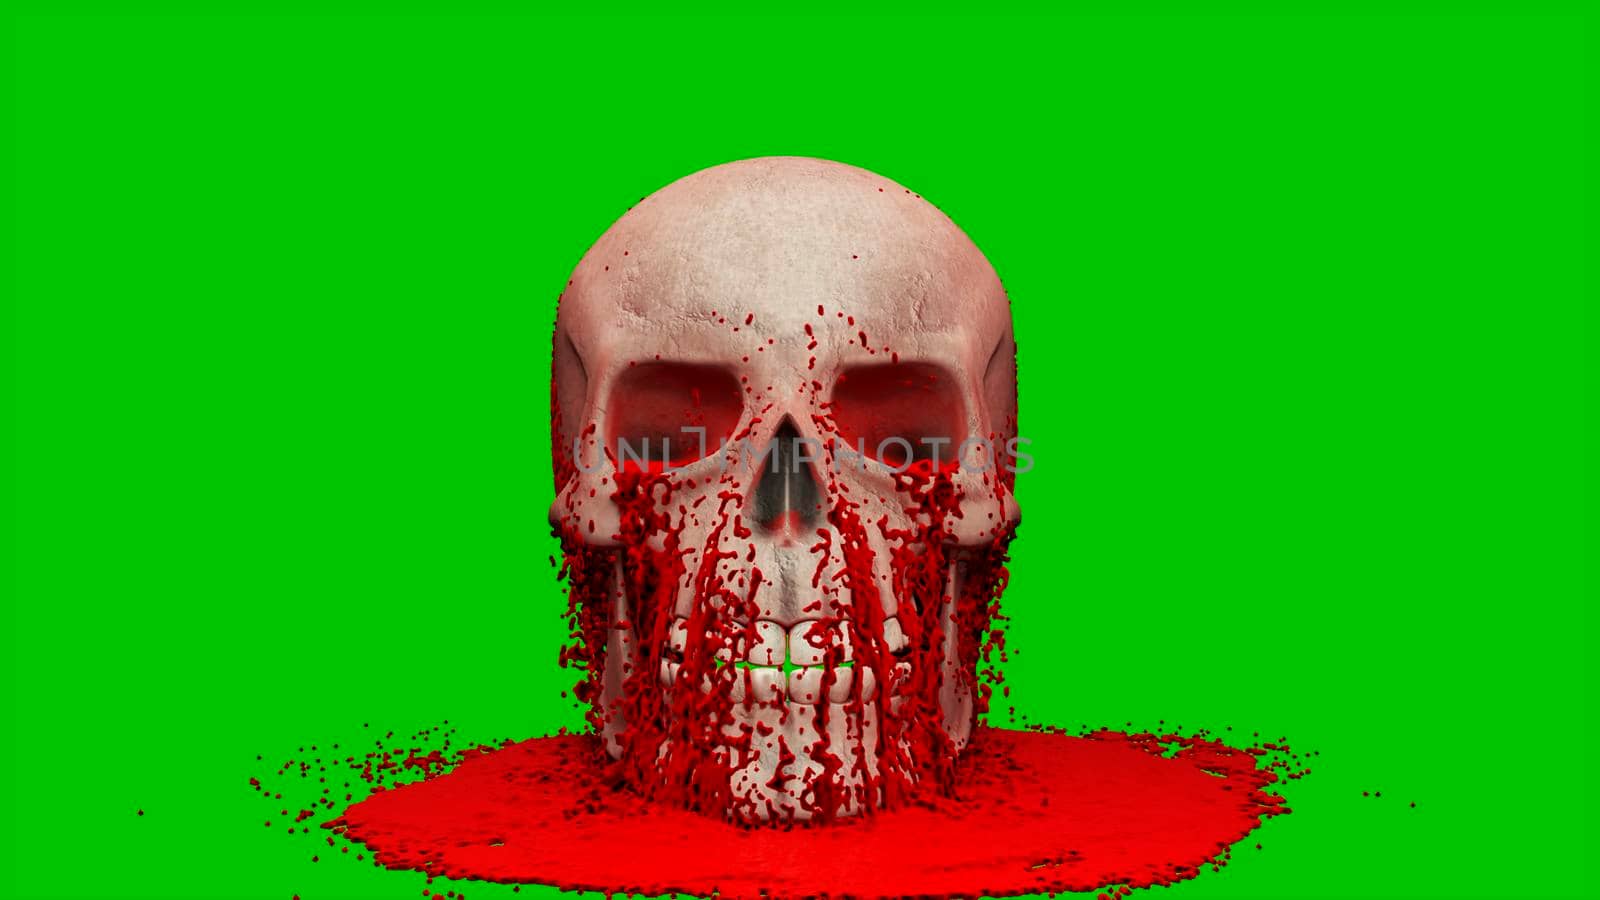 Thick red blood pours onto the human skull. The concept of a post-apocalyptic world.